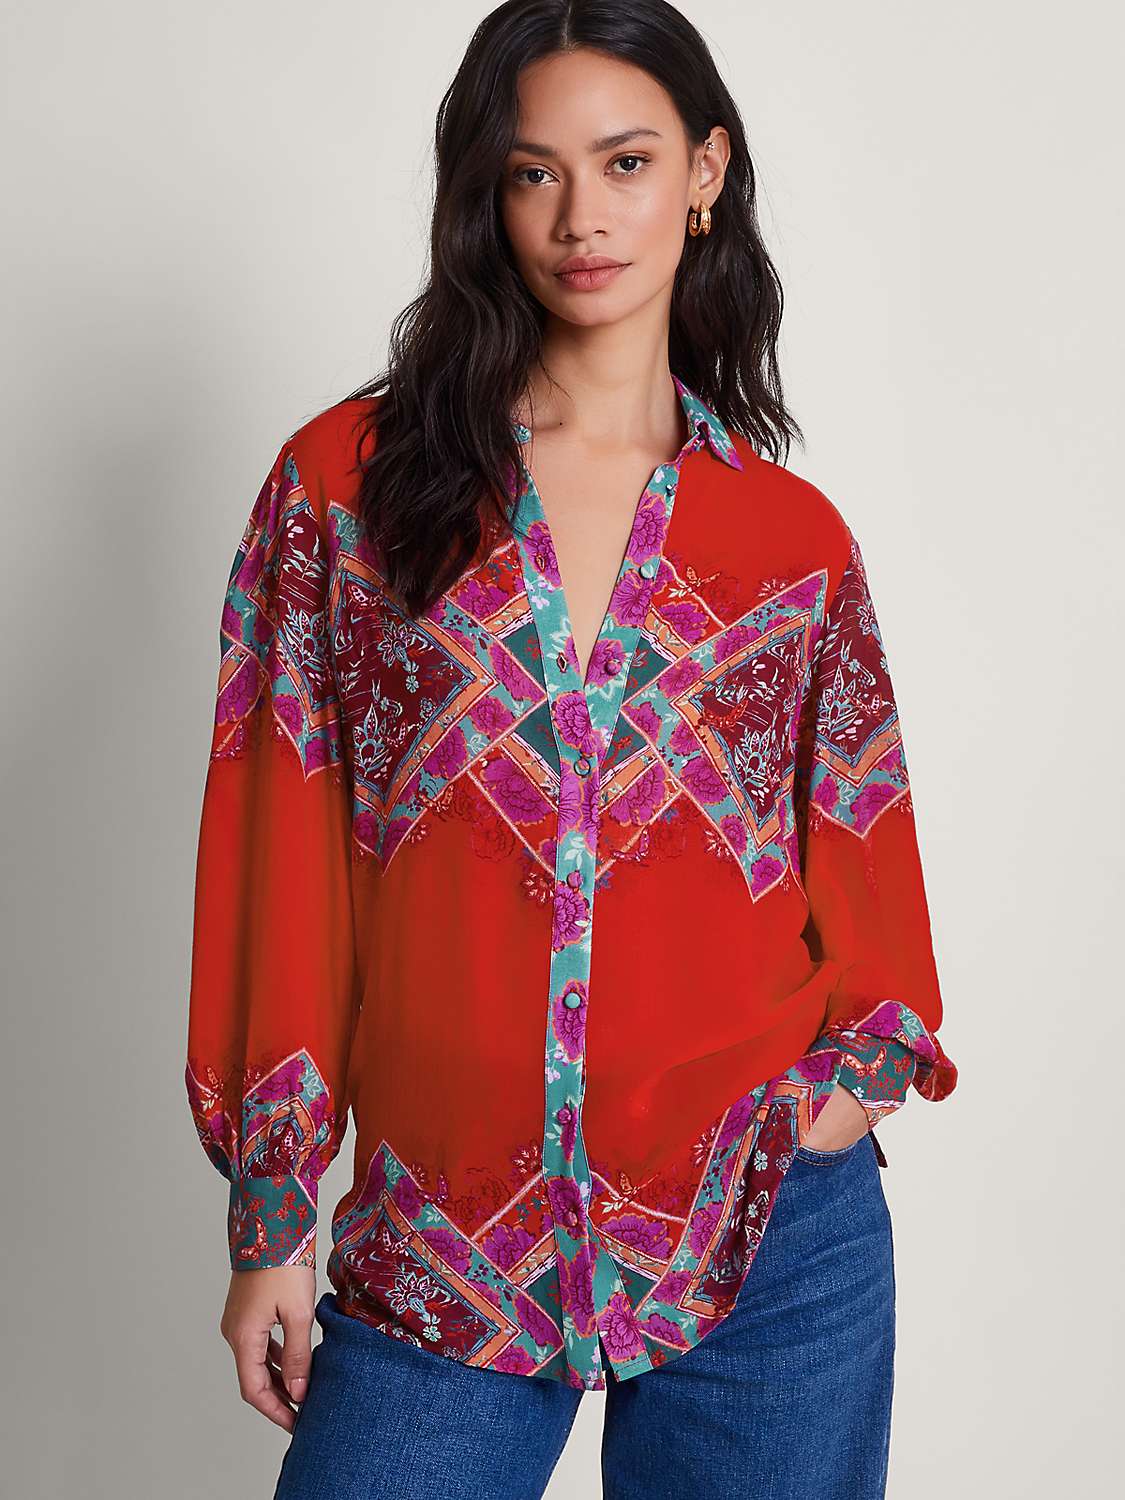 Buy Monsoon Tiffany Blouse, Red/Multi Online at johnlewis.com